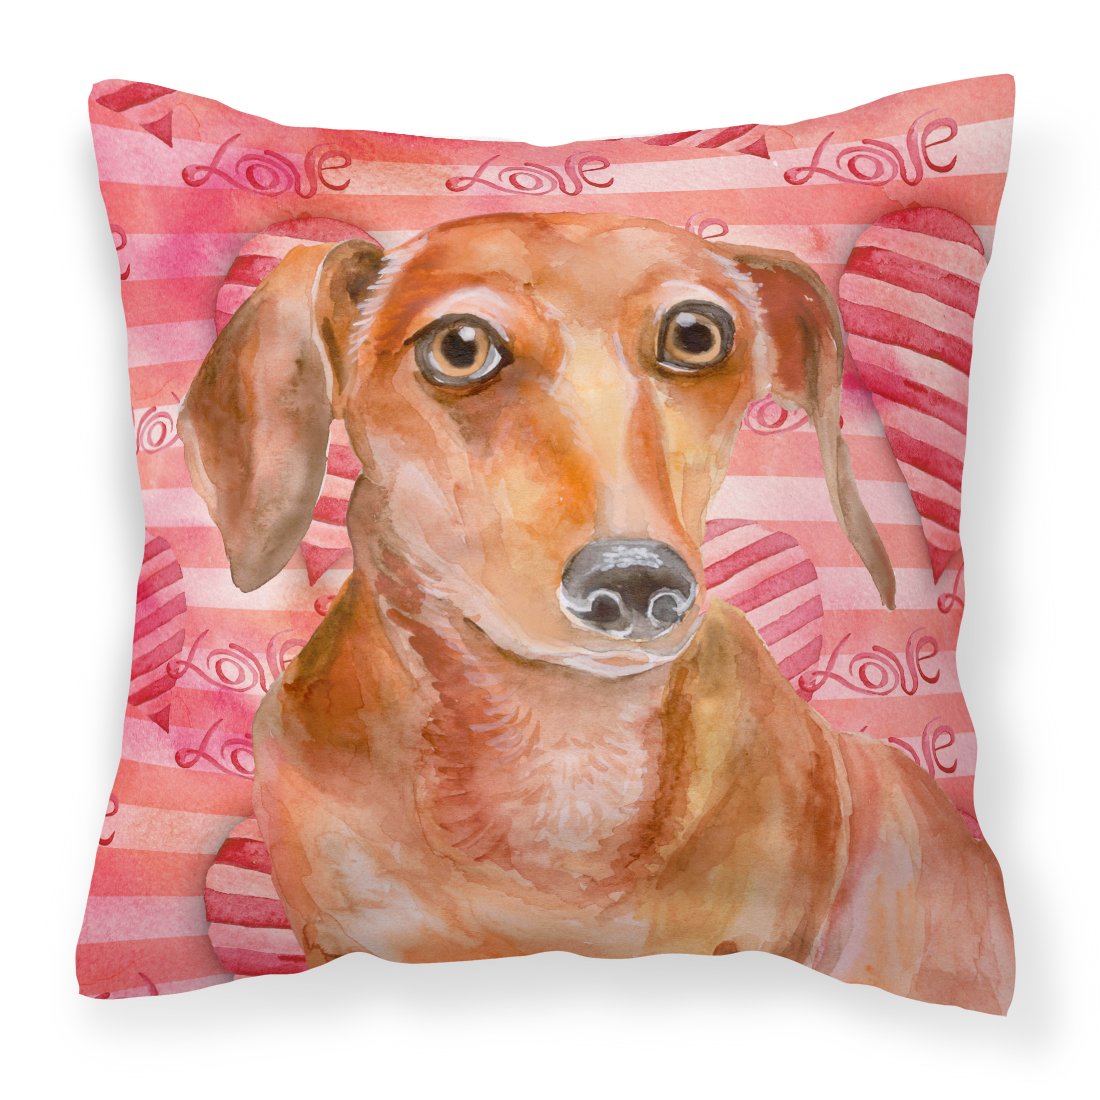 Red Dachshund Love Fabric Decorative Pillow BB9794PW1818 by Caroline's Treasures